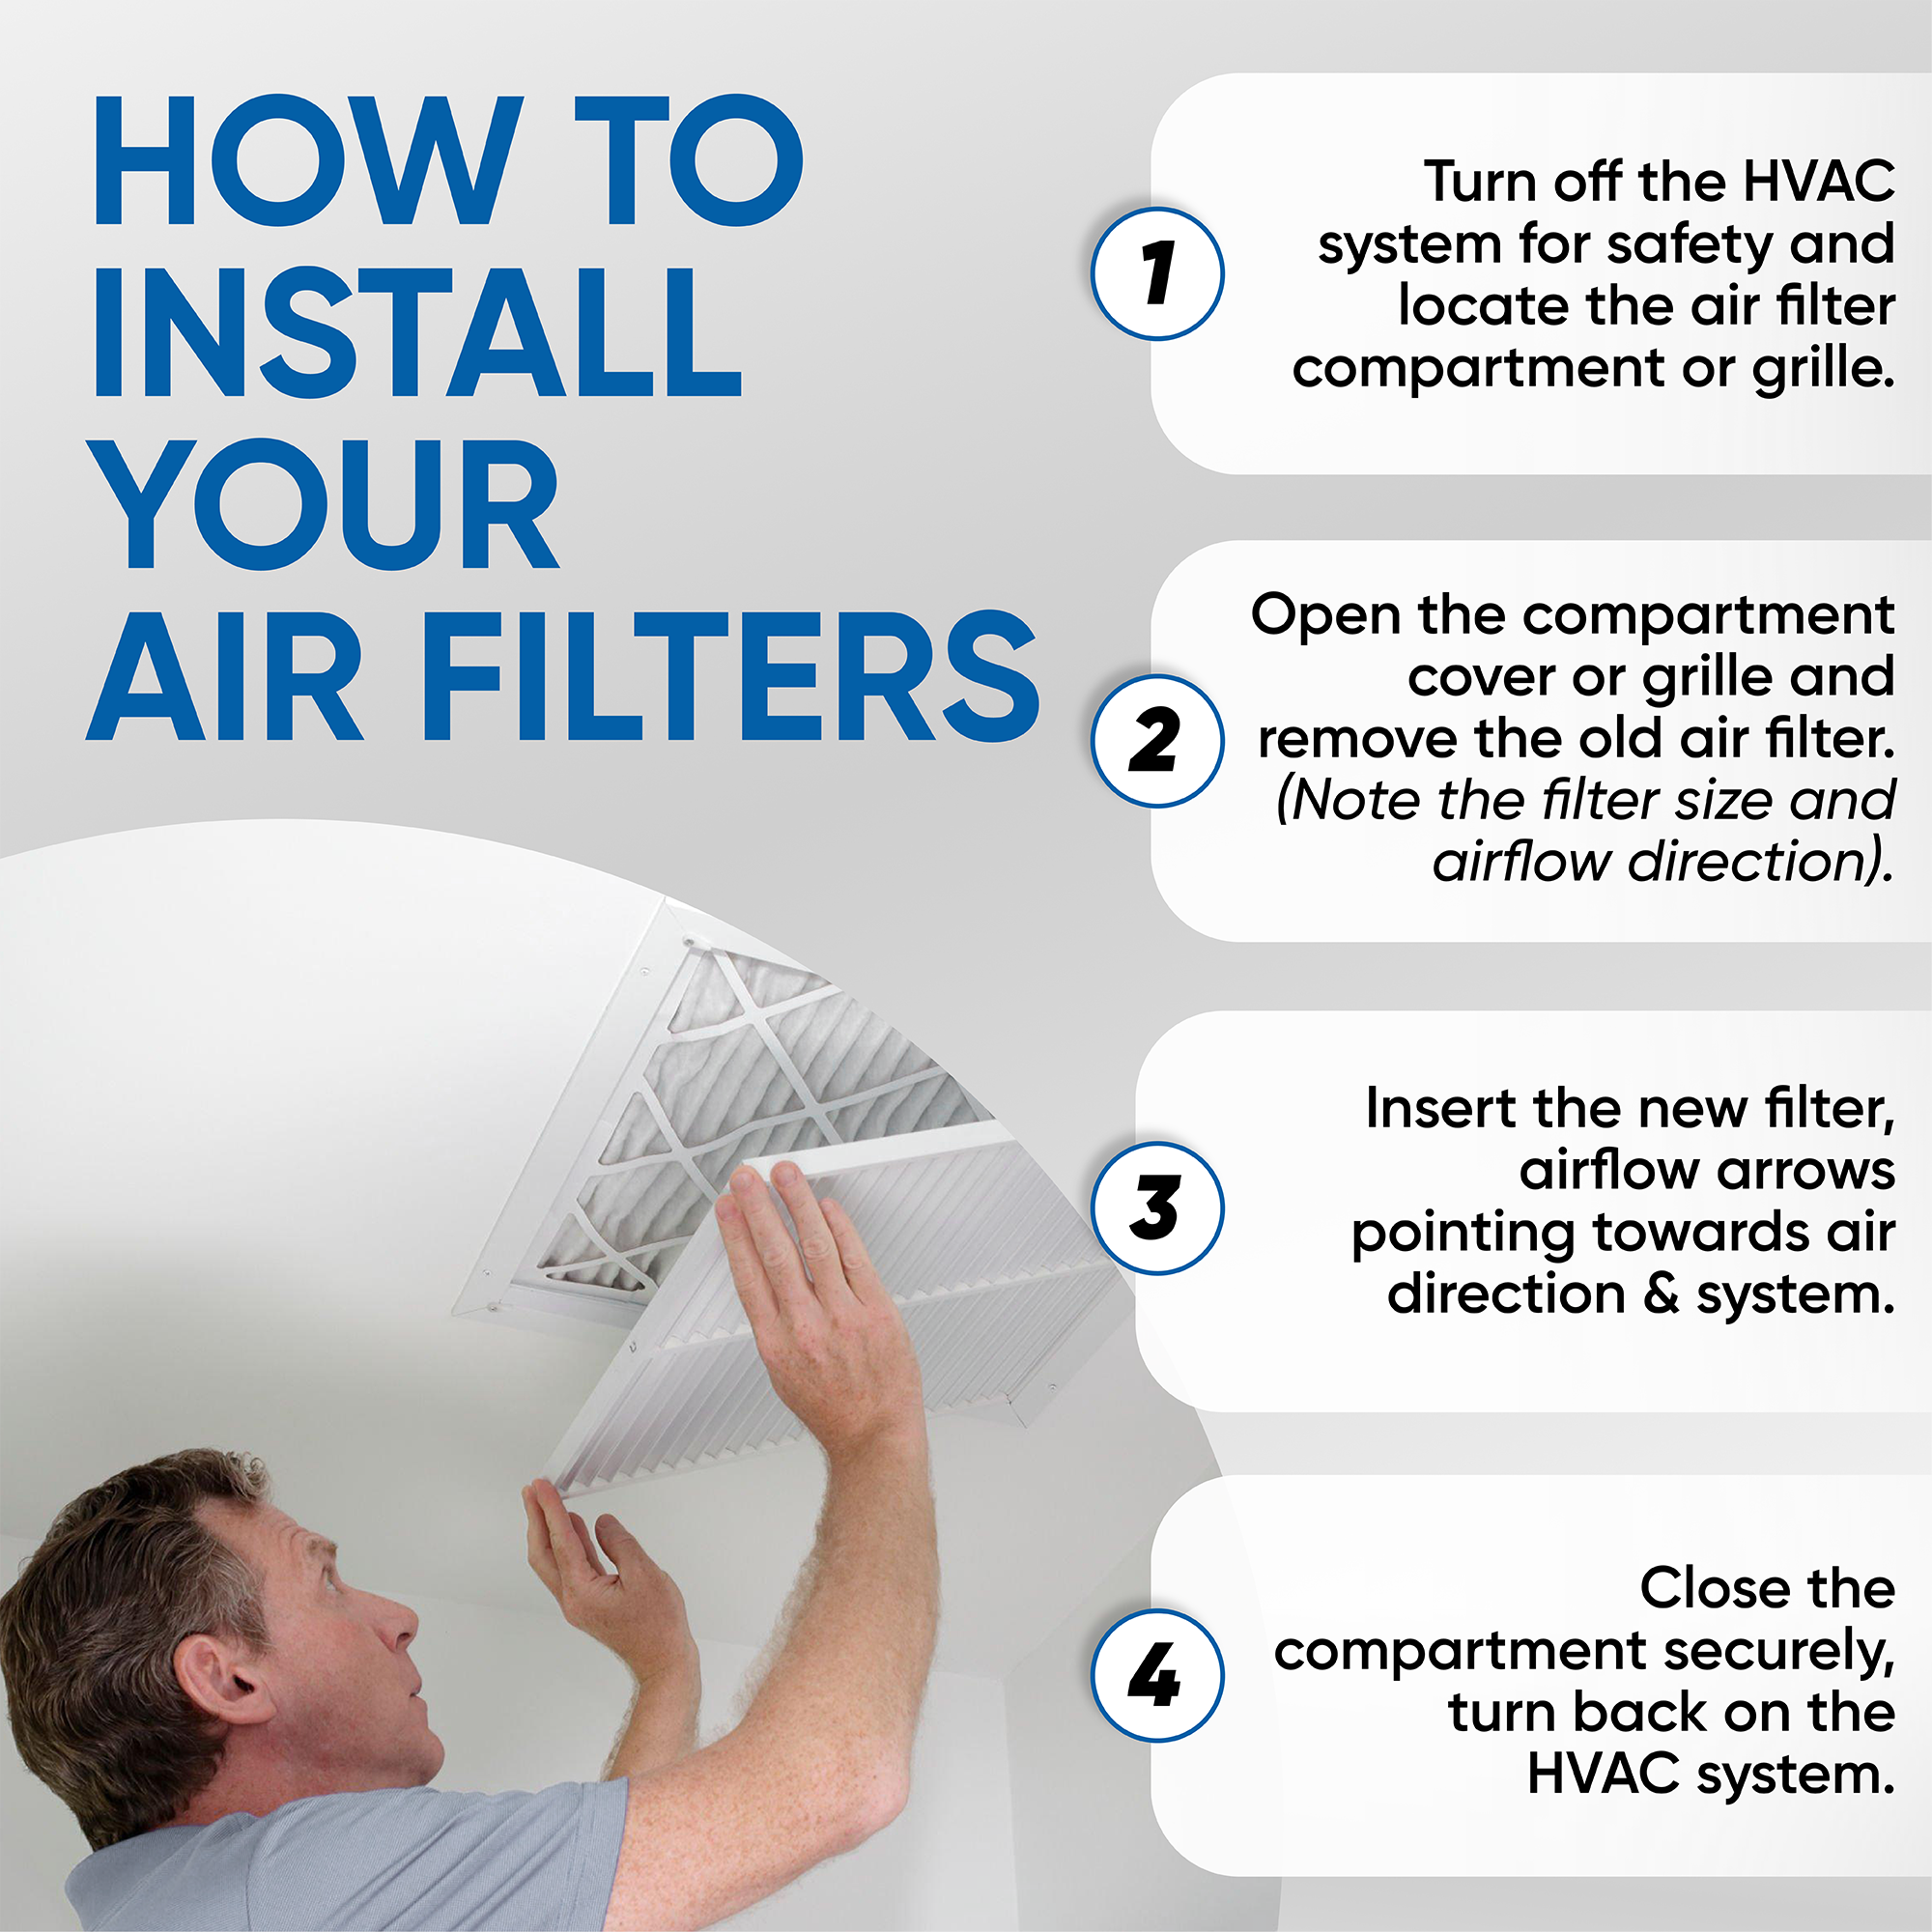 Filters Delivered 20x22x1 MERV 13 HVAC Air Filters.  6 Pack